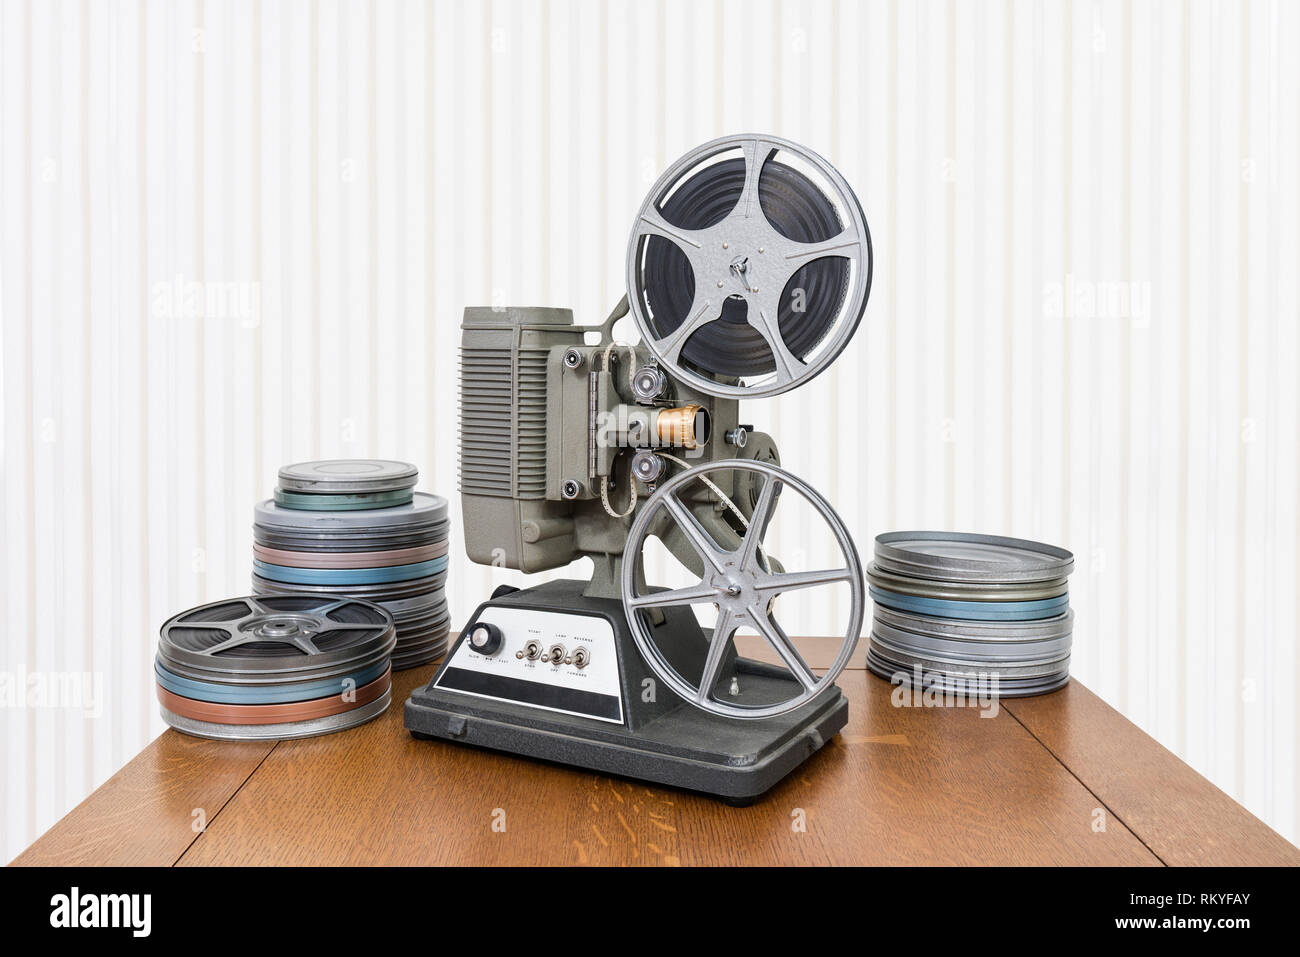 Vintage 8mm home movie projector and film cans on wood table Stock Photo -  Alamy